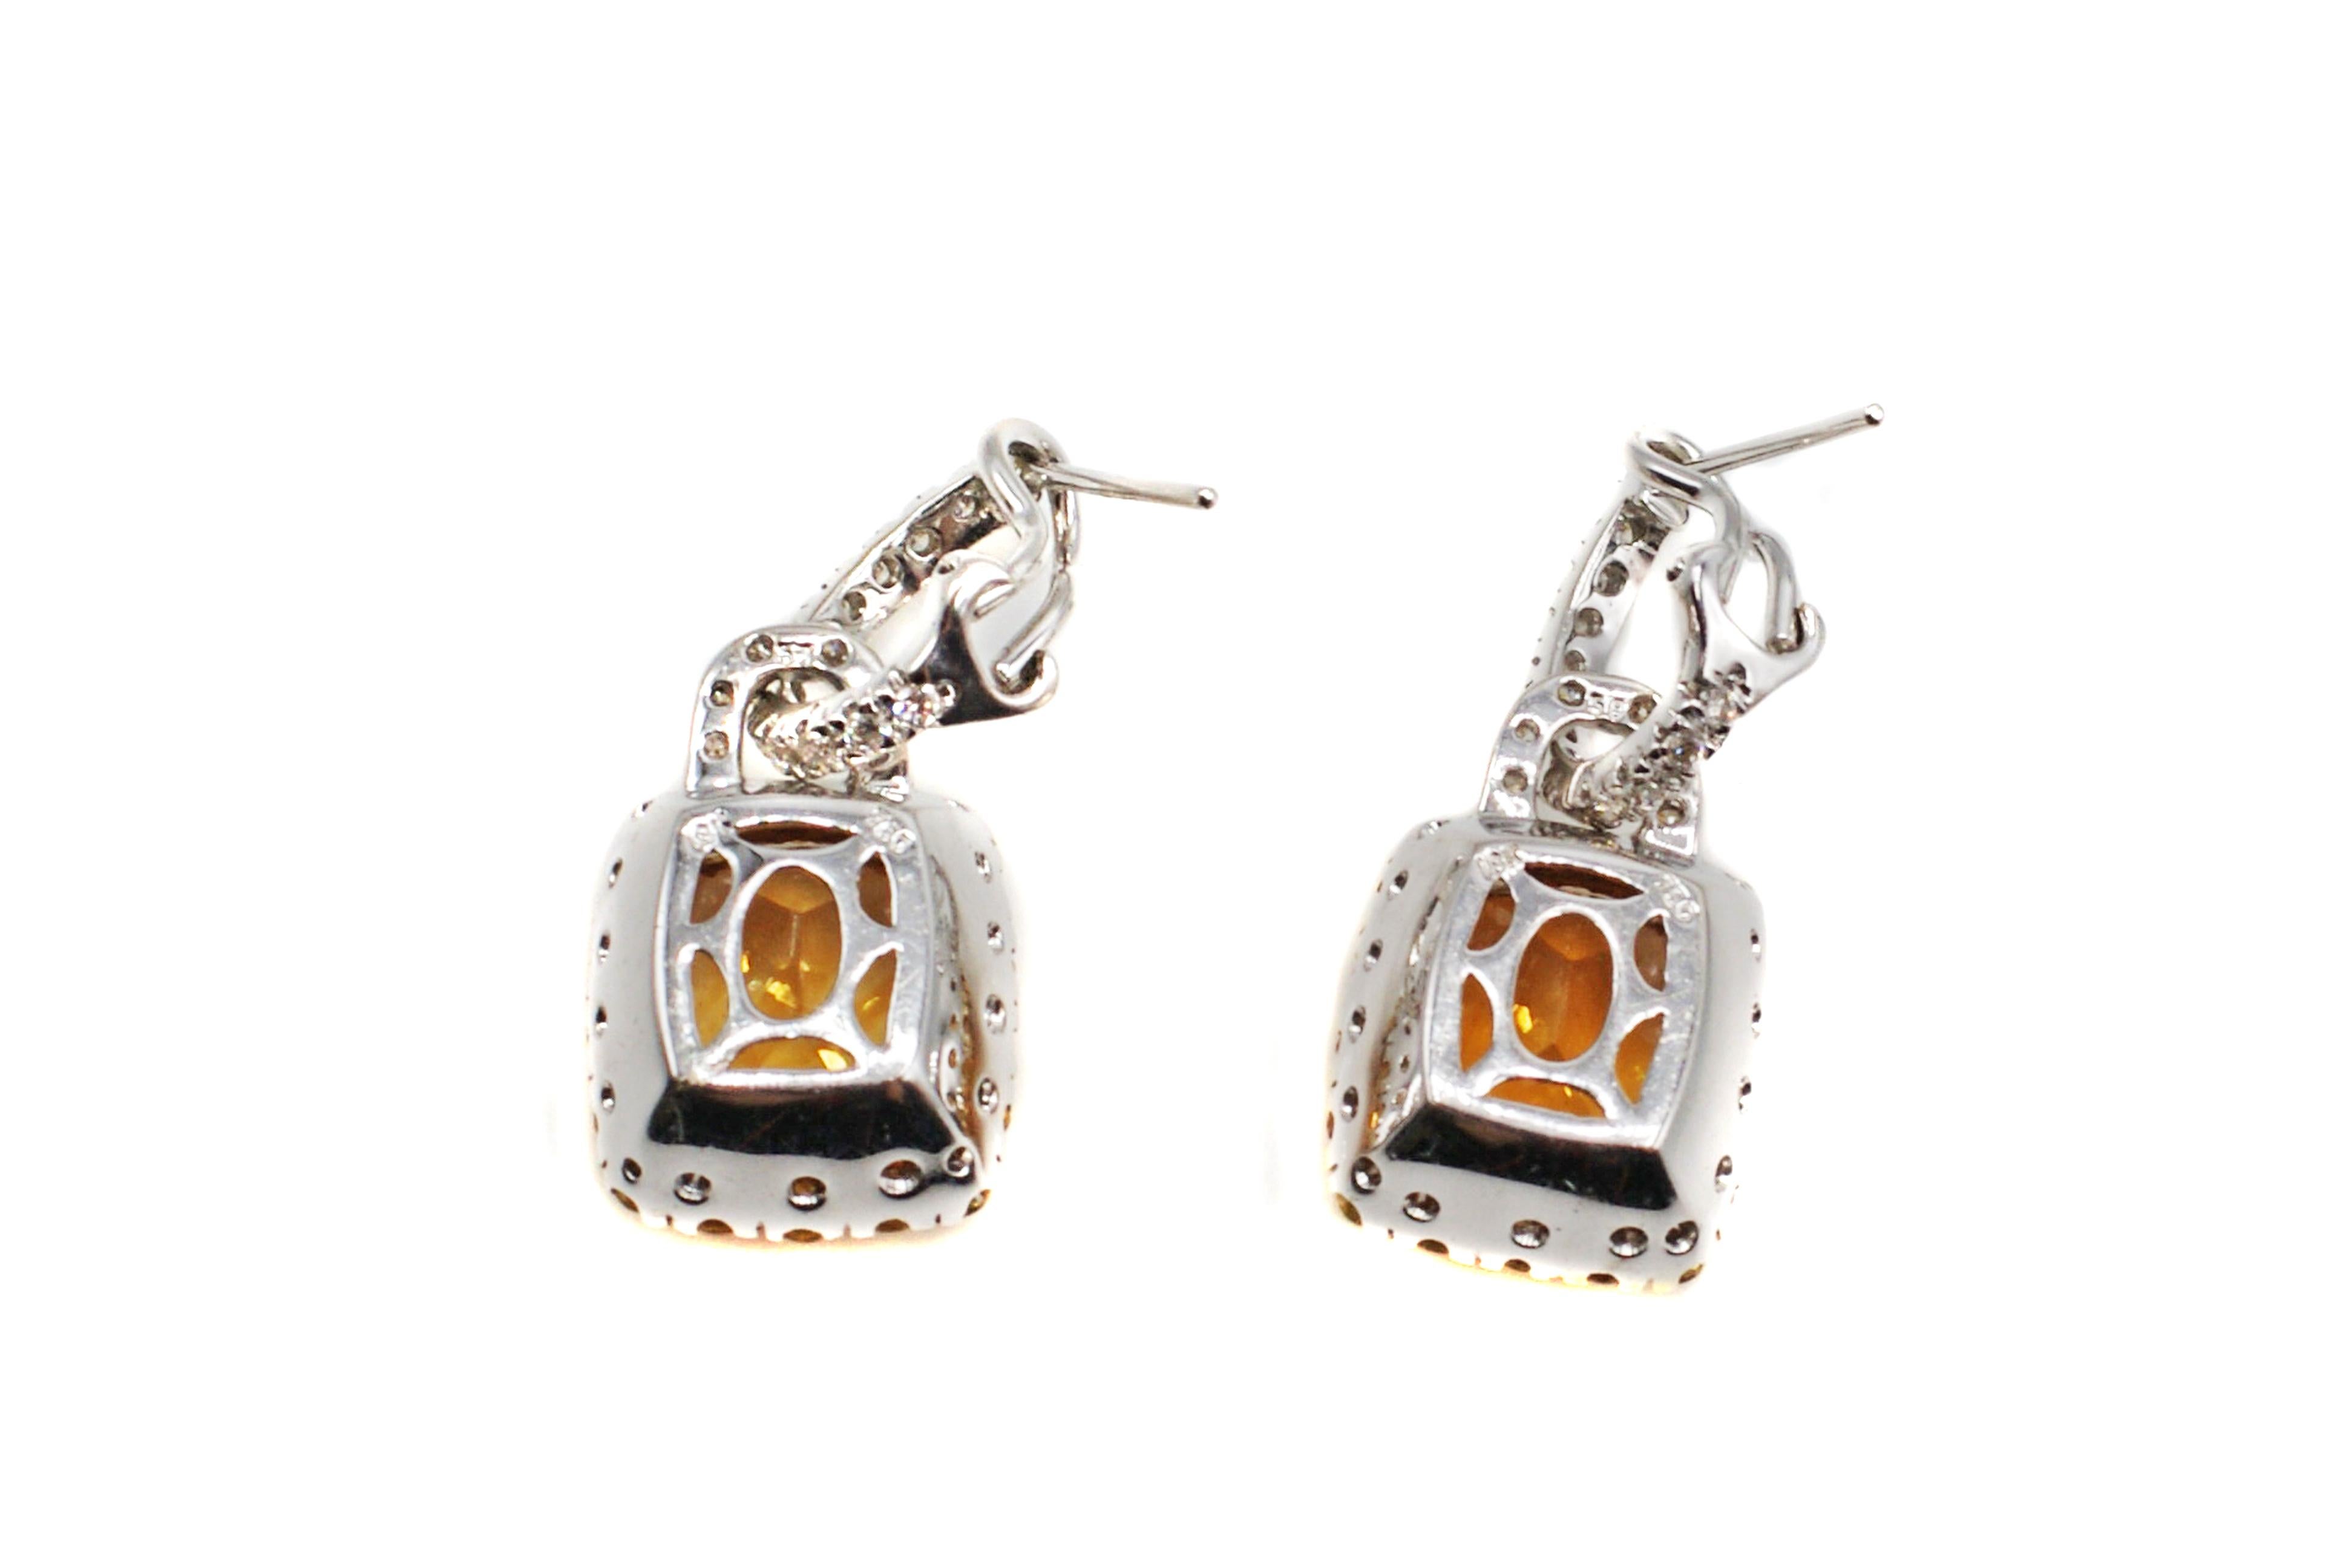 Beautifully designed and finely hand-crafted, these elegant ear pendants feature a pair of perfectly matched bright orange Citrines. The 2 cushion cut gems are measured to weigh approximately 5.5 carats, with a total weight of approximately 11